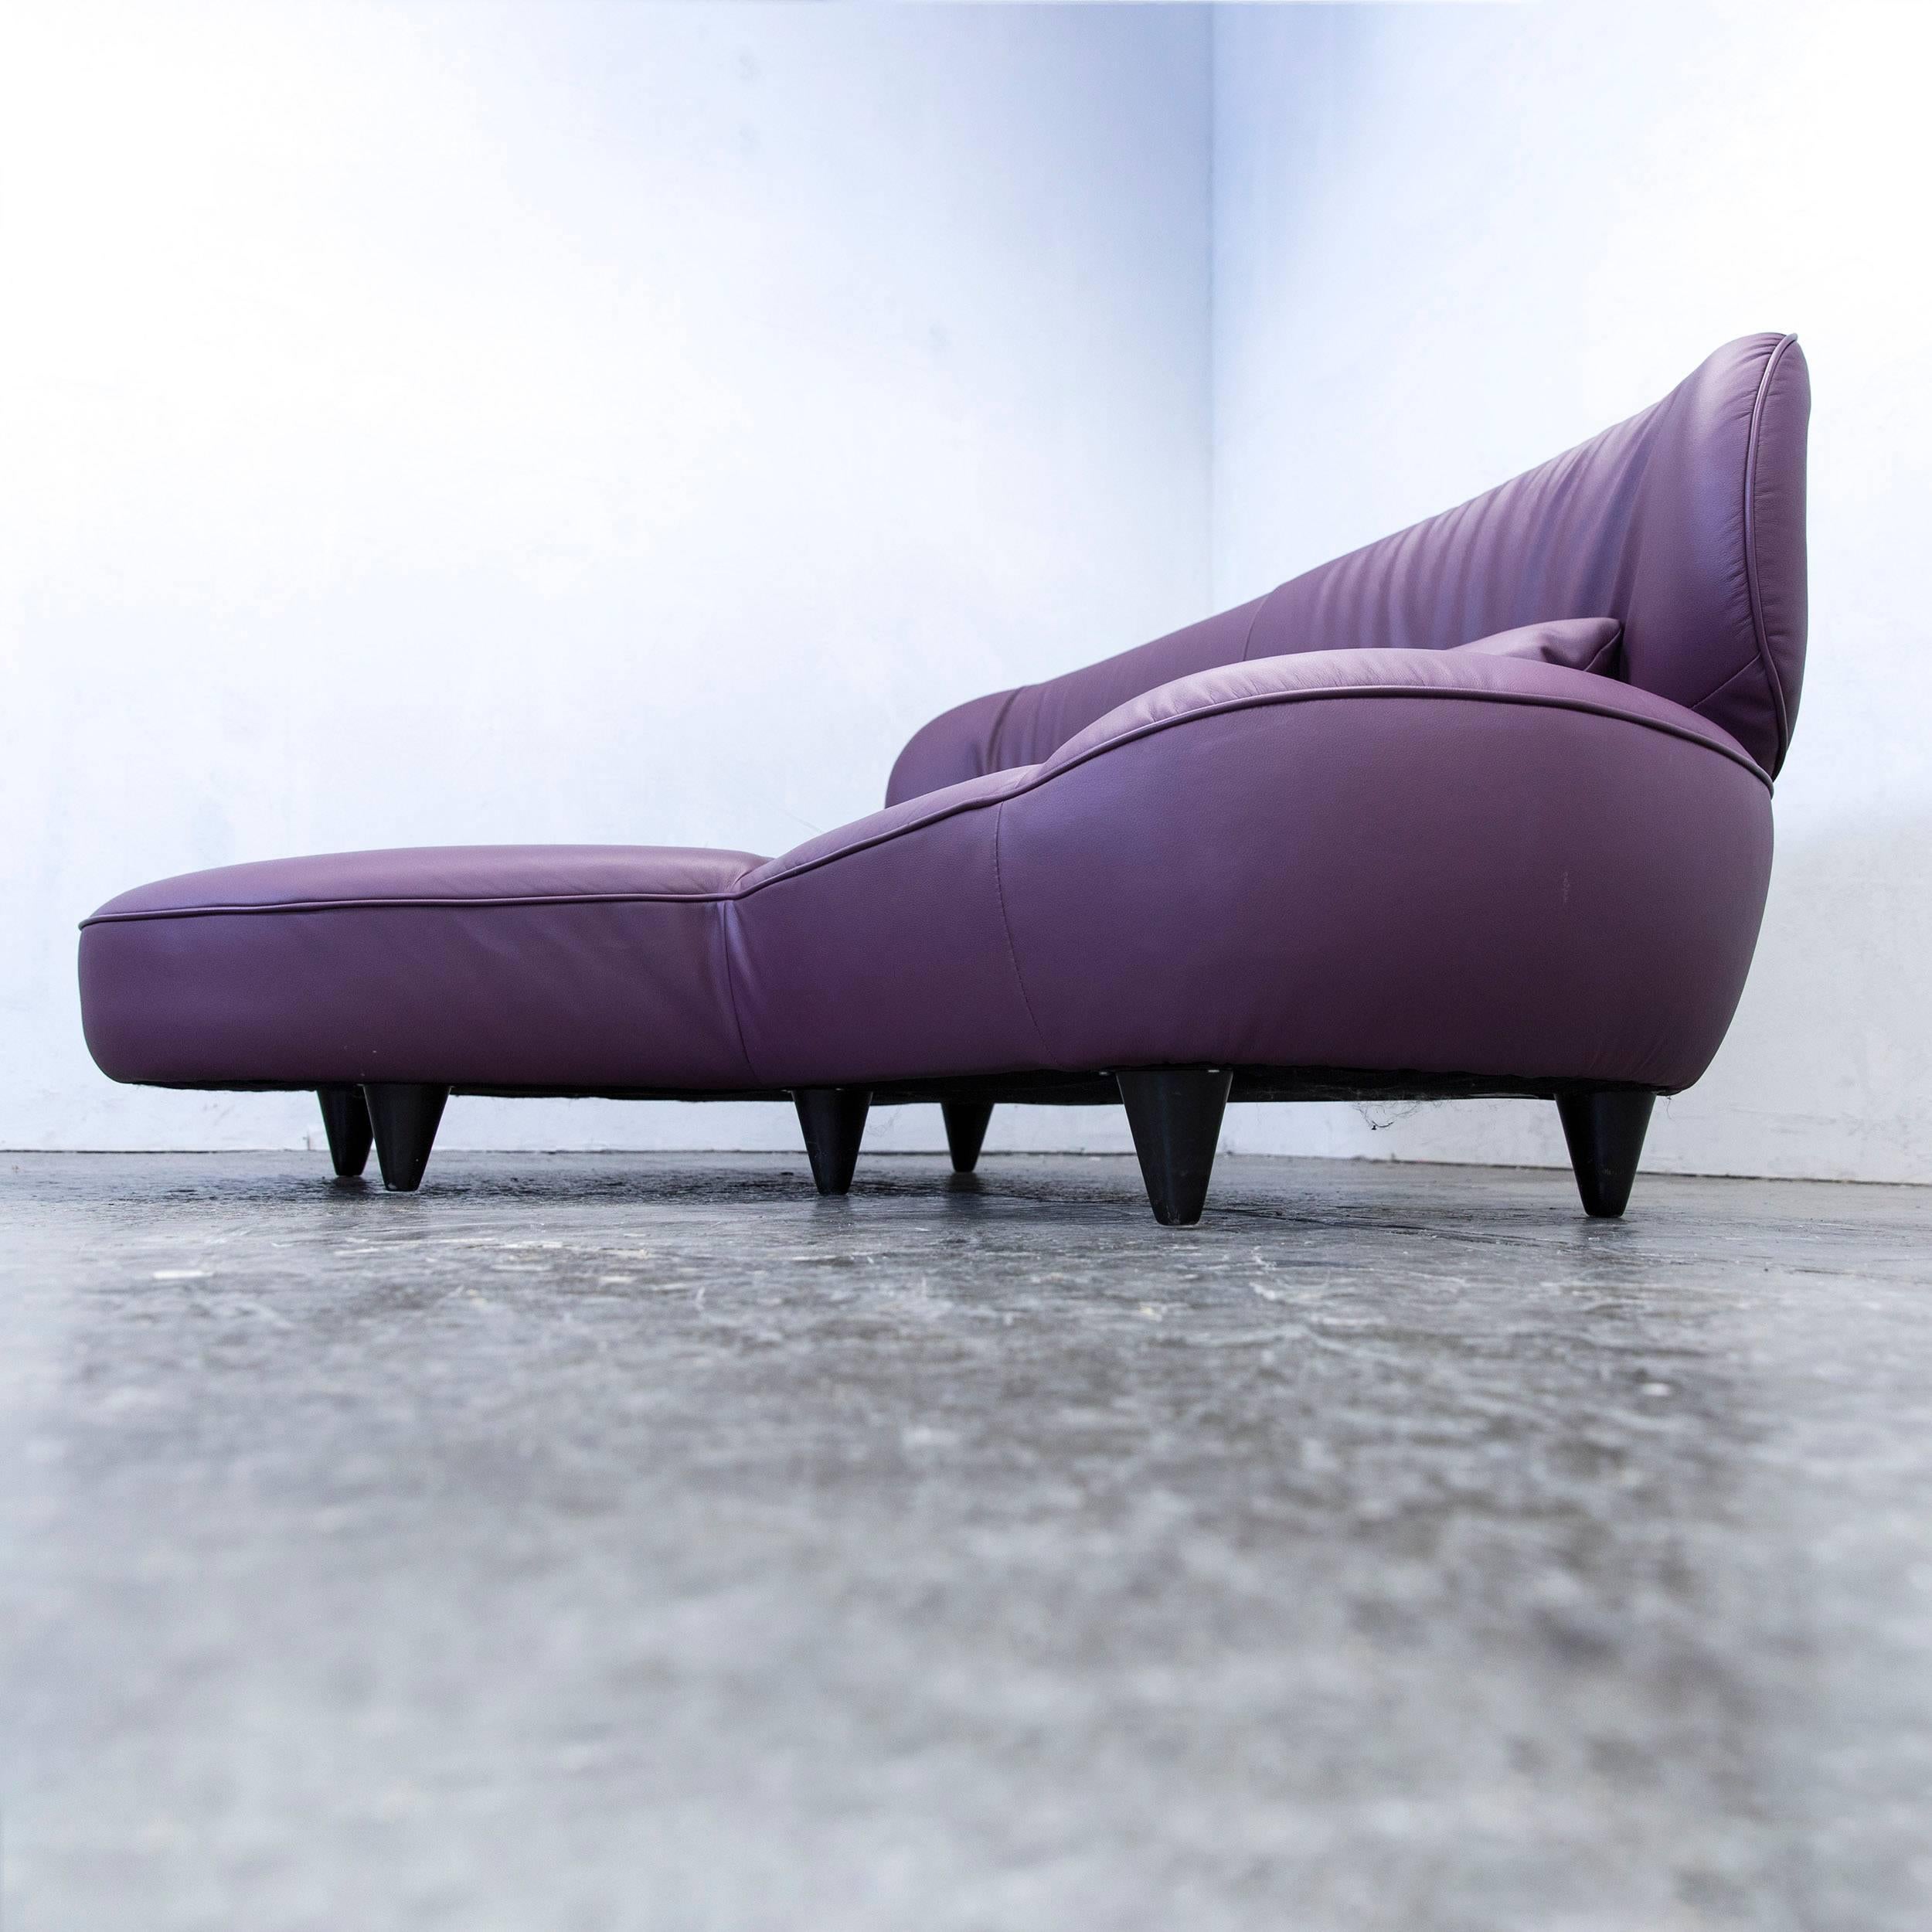 lilac couch